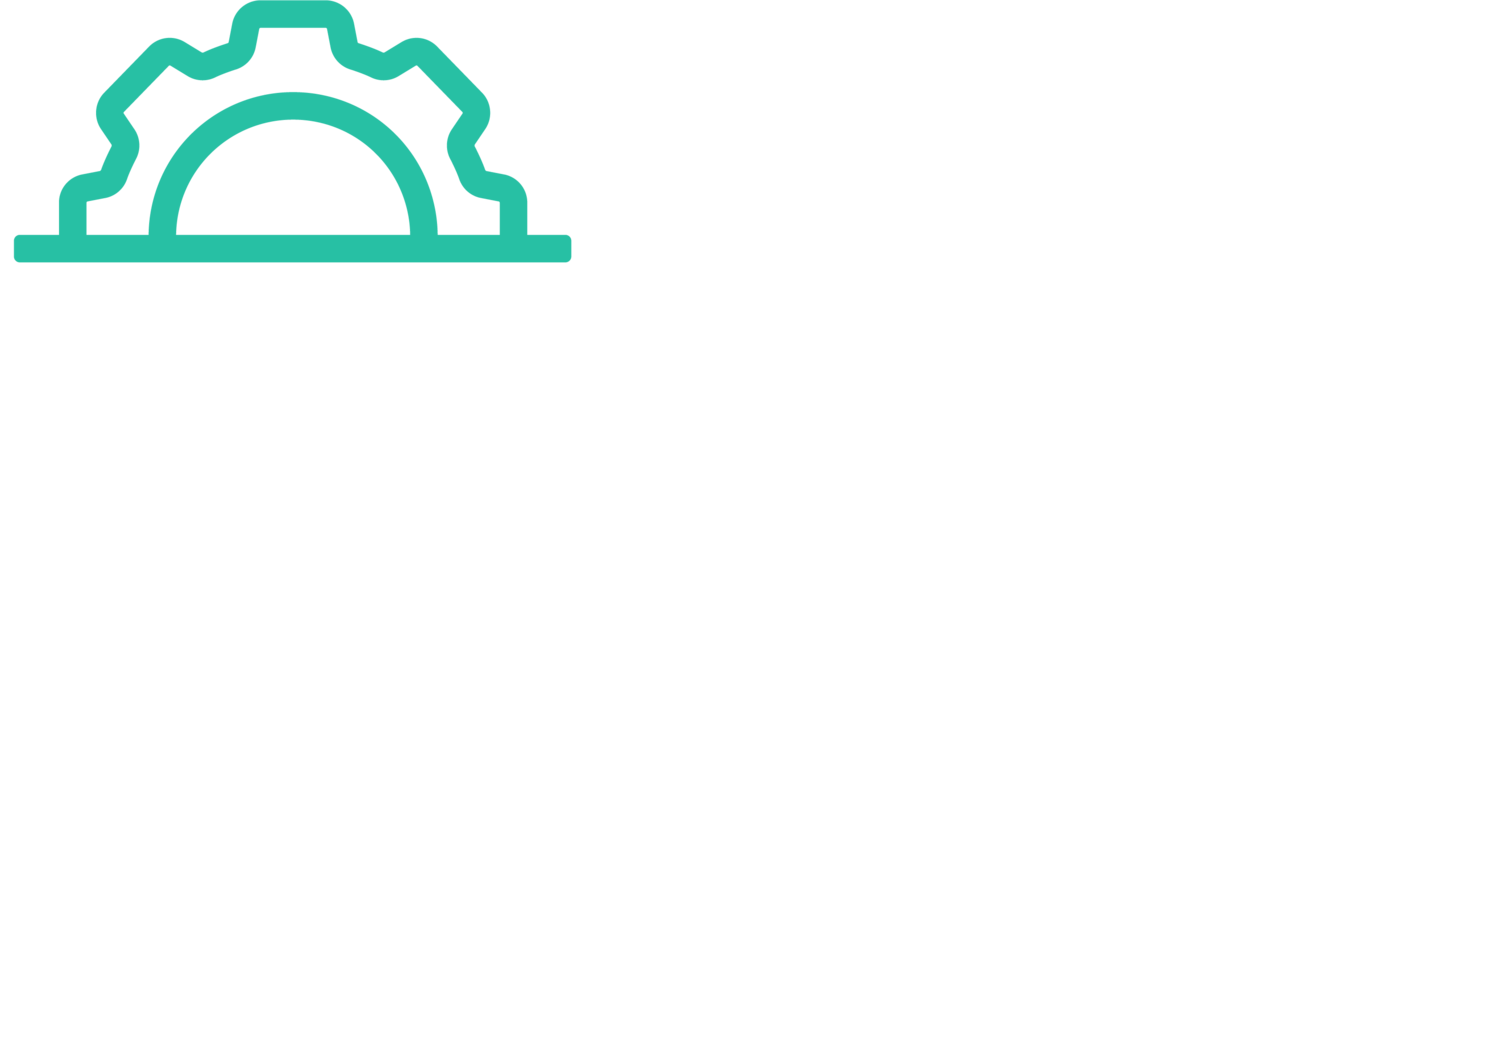 Tech factory . Law clipart natural law